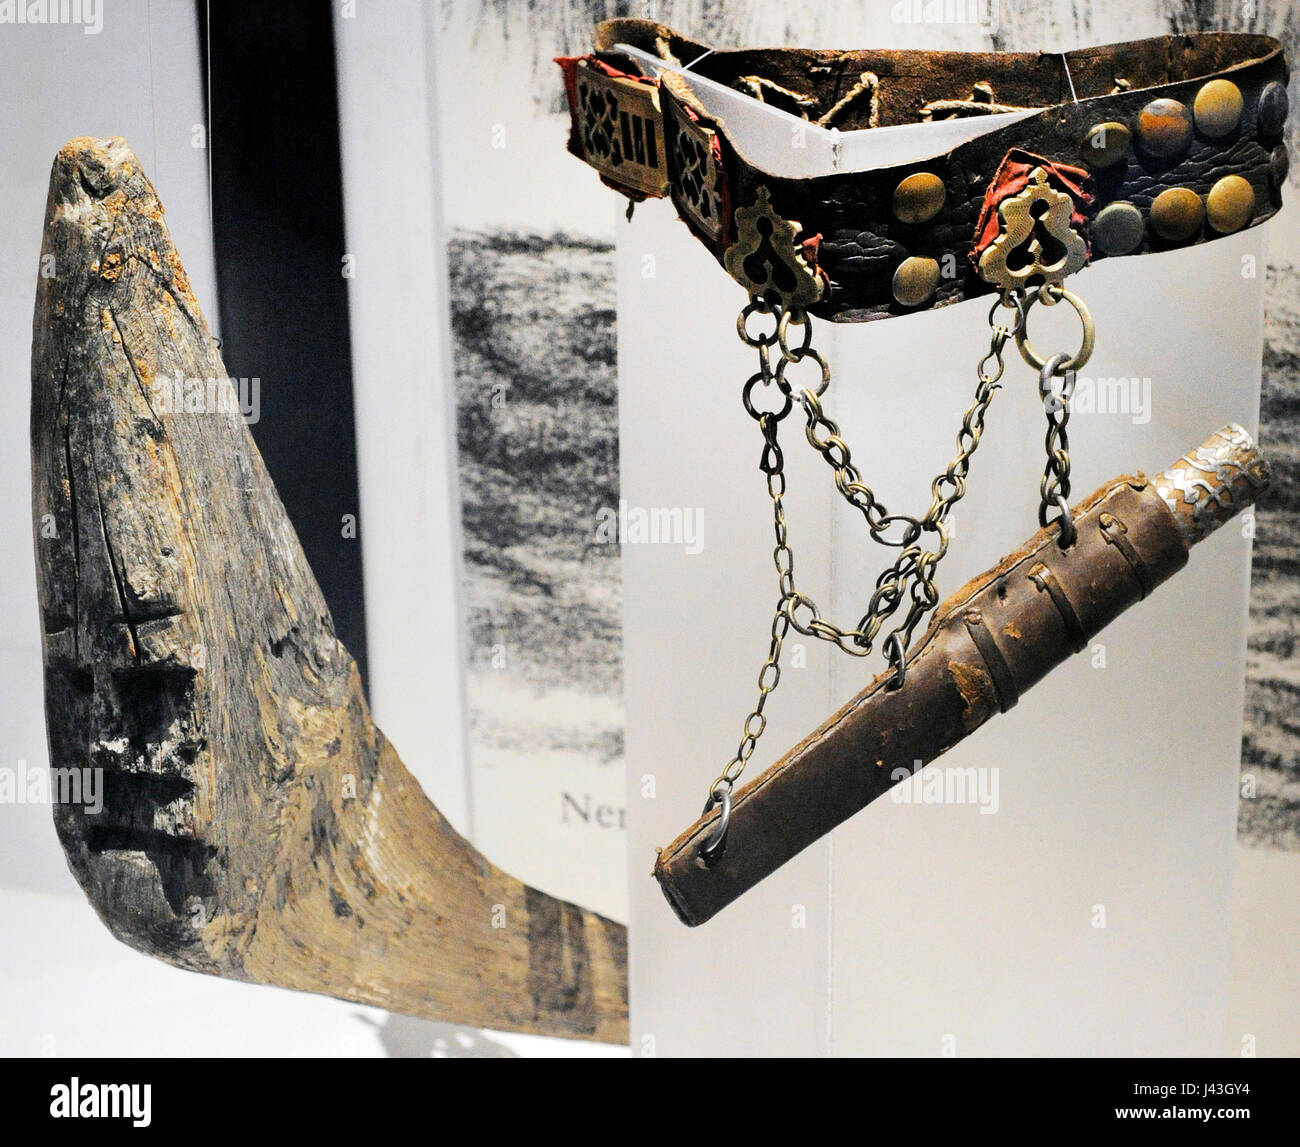 Different objects related to the 'Angakoq', Inuit shamans. Exhibition of clothing  and Eskimo objects. Historical Museum. Oslo. Norway. Stock Photo